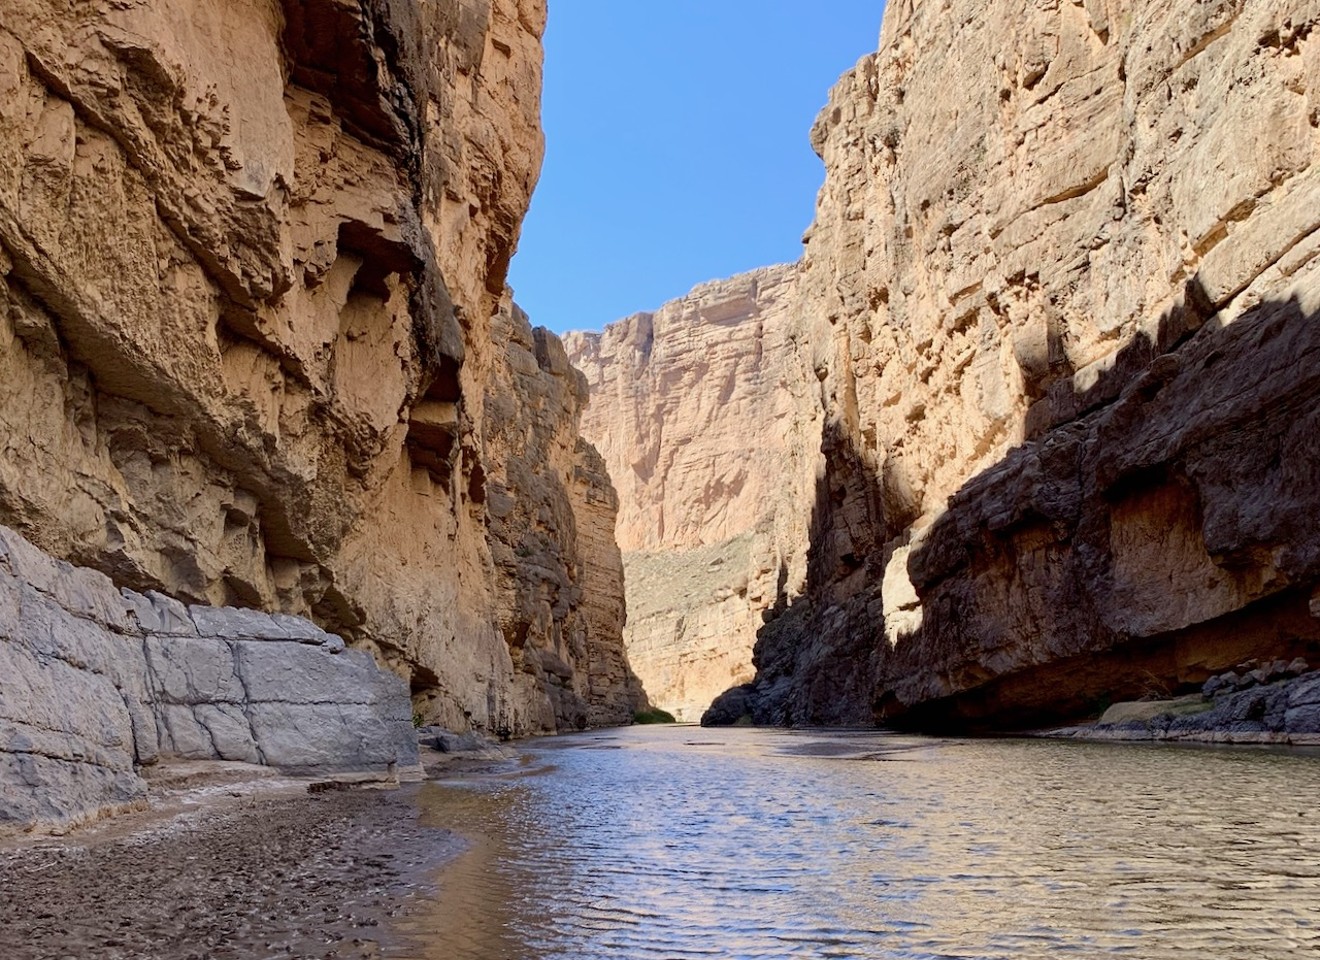 Inside Santa Elena Canyon, which is about a mile walk down an easy trail. Mexico is on the left, the U.S. is on the right.